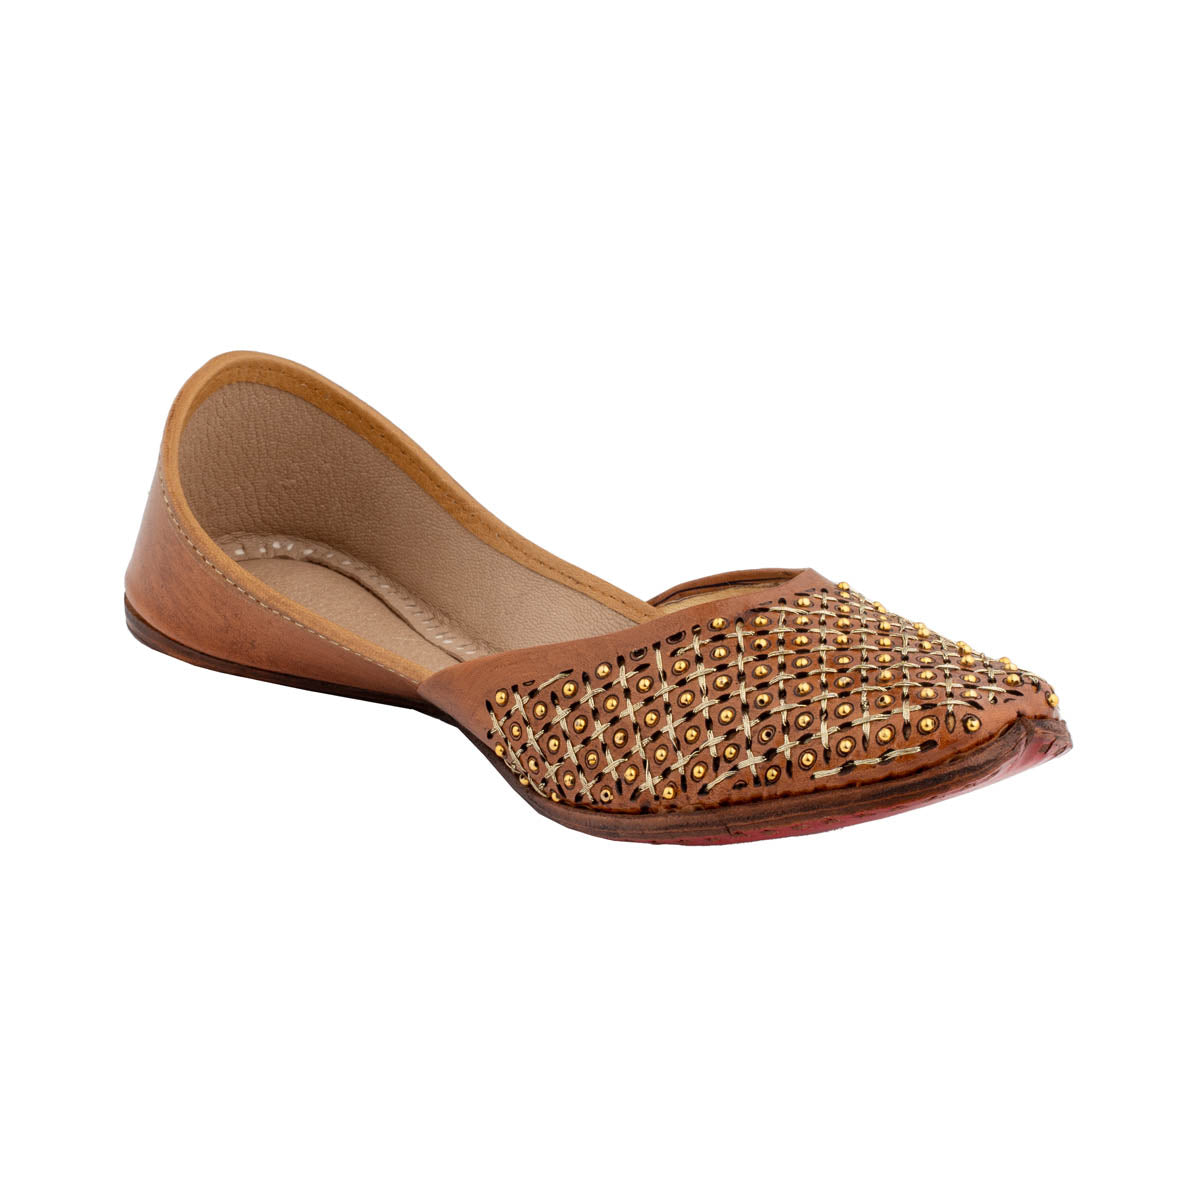 Amber jutti for women combining style and comfort